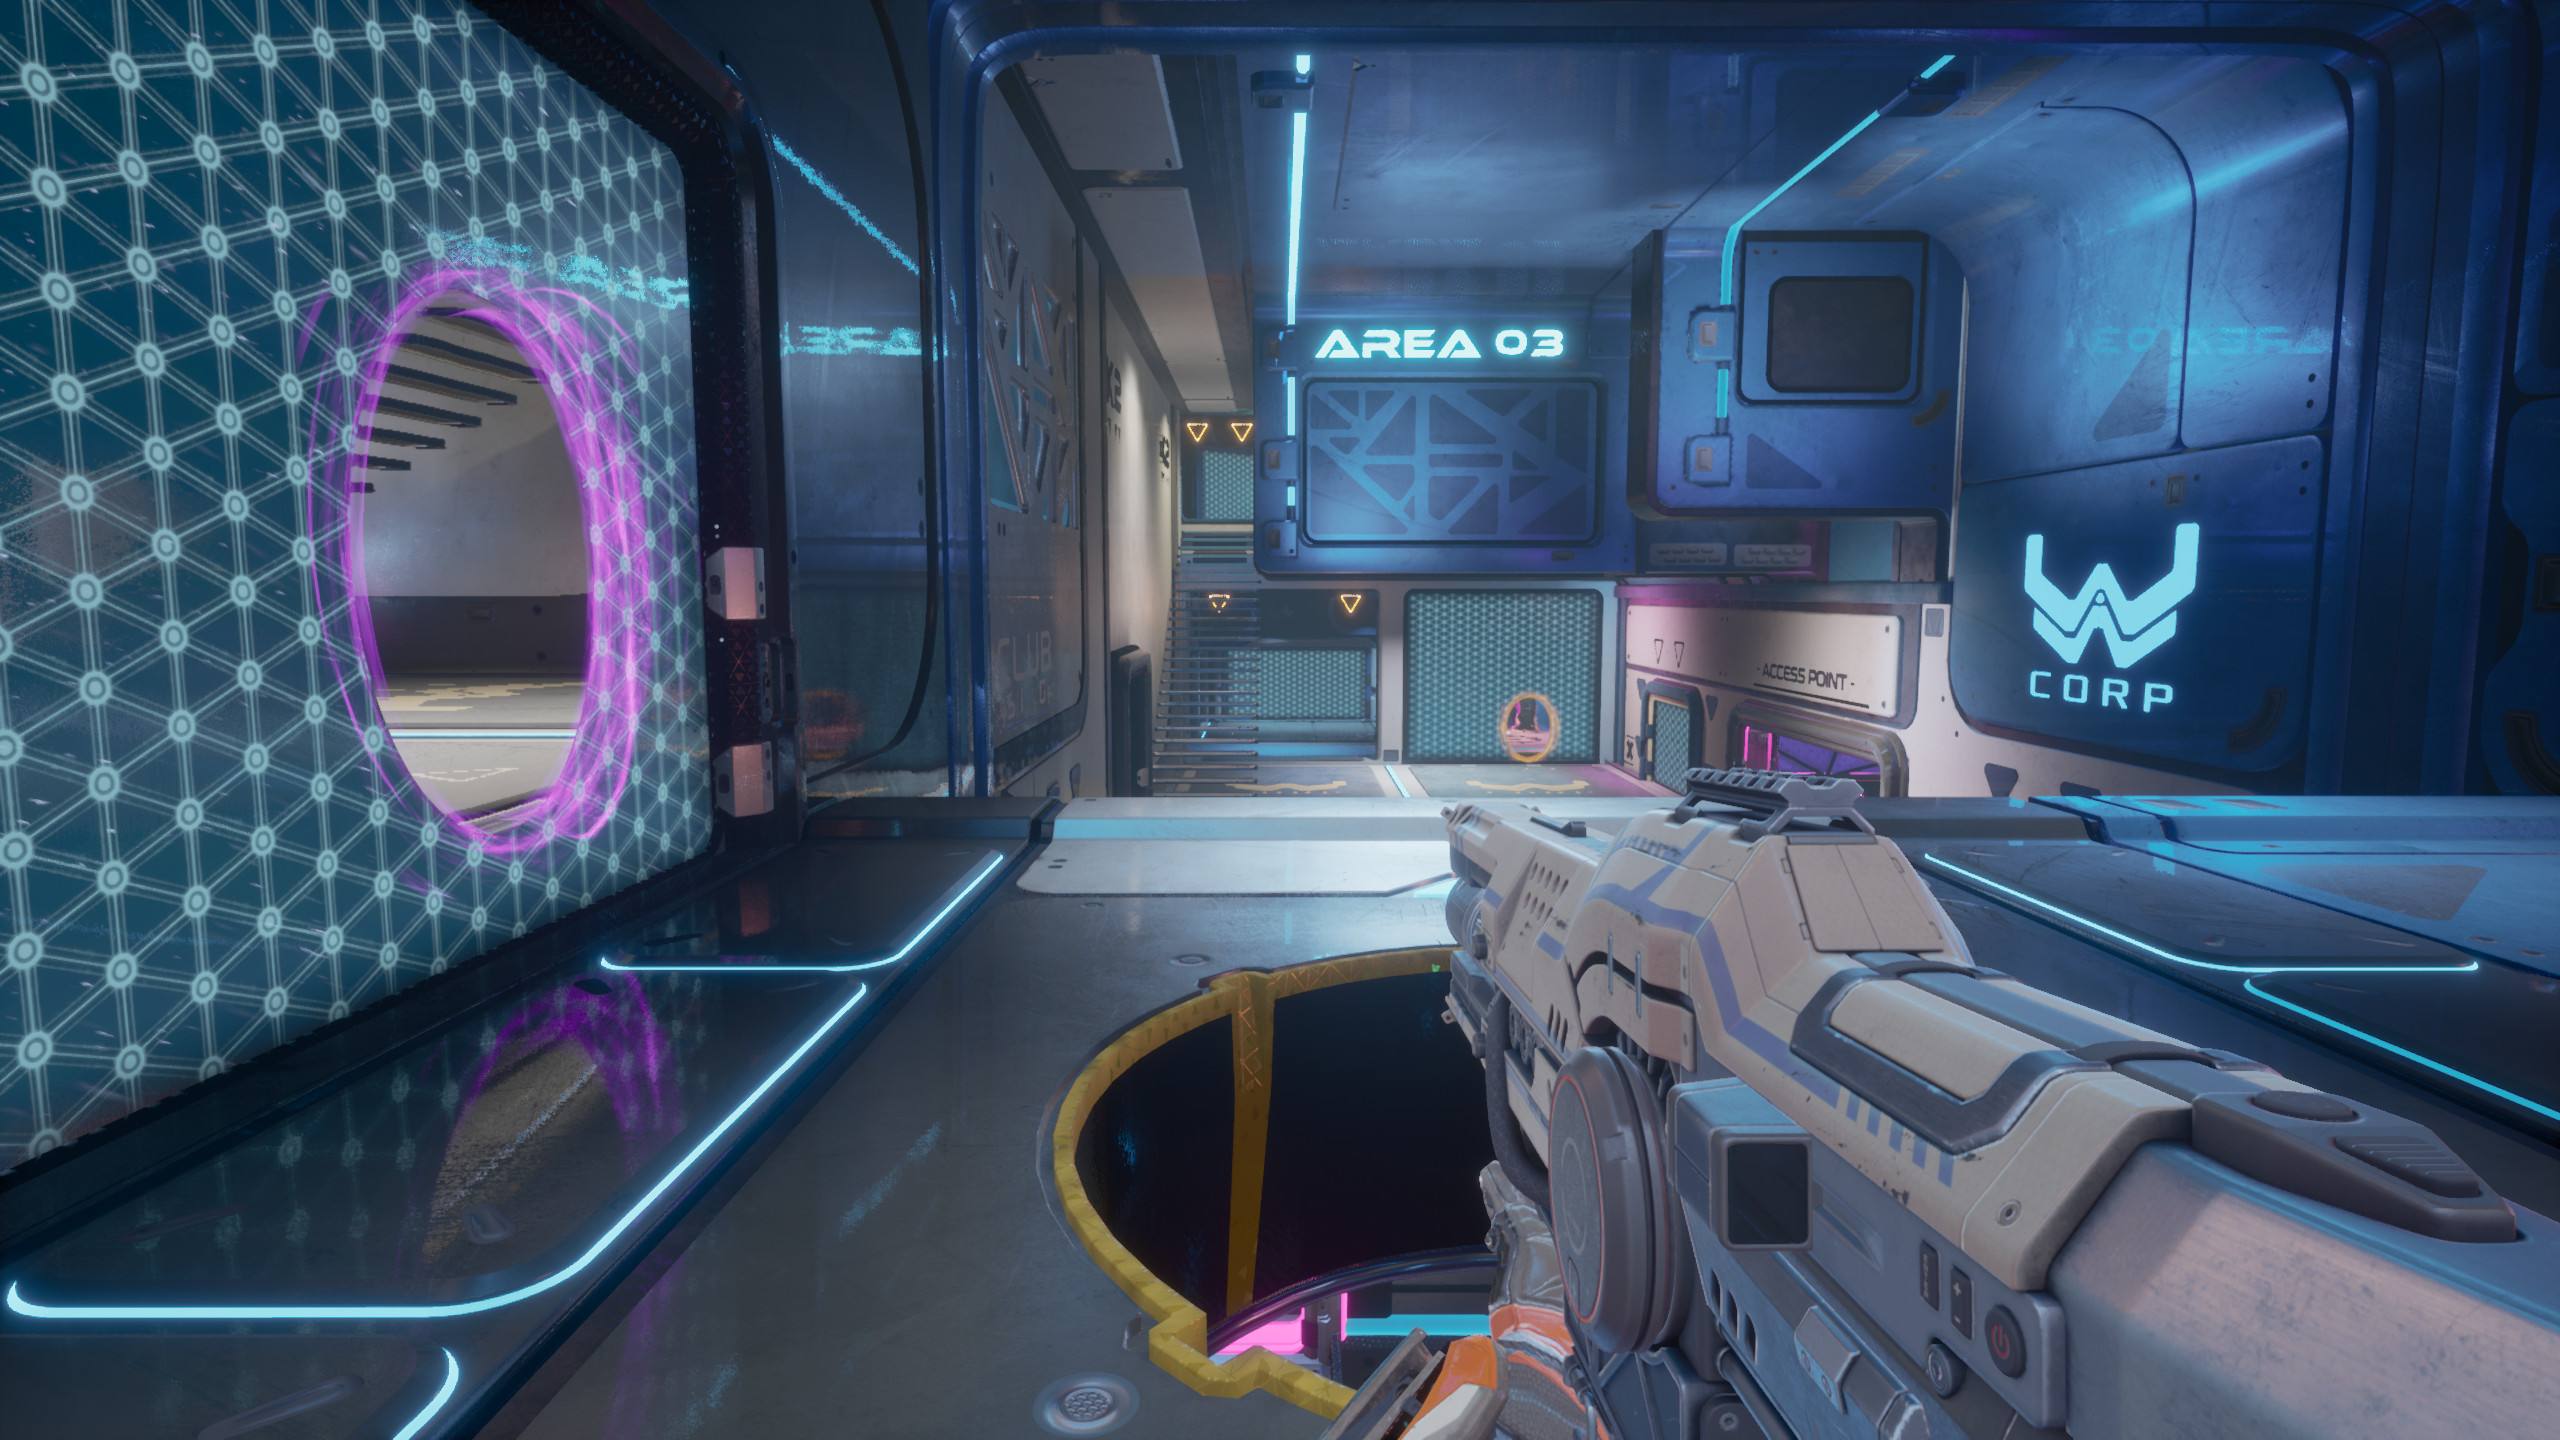 Splitgate Guide: Tips, Tricks, and How to Play